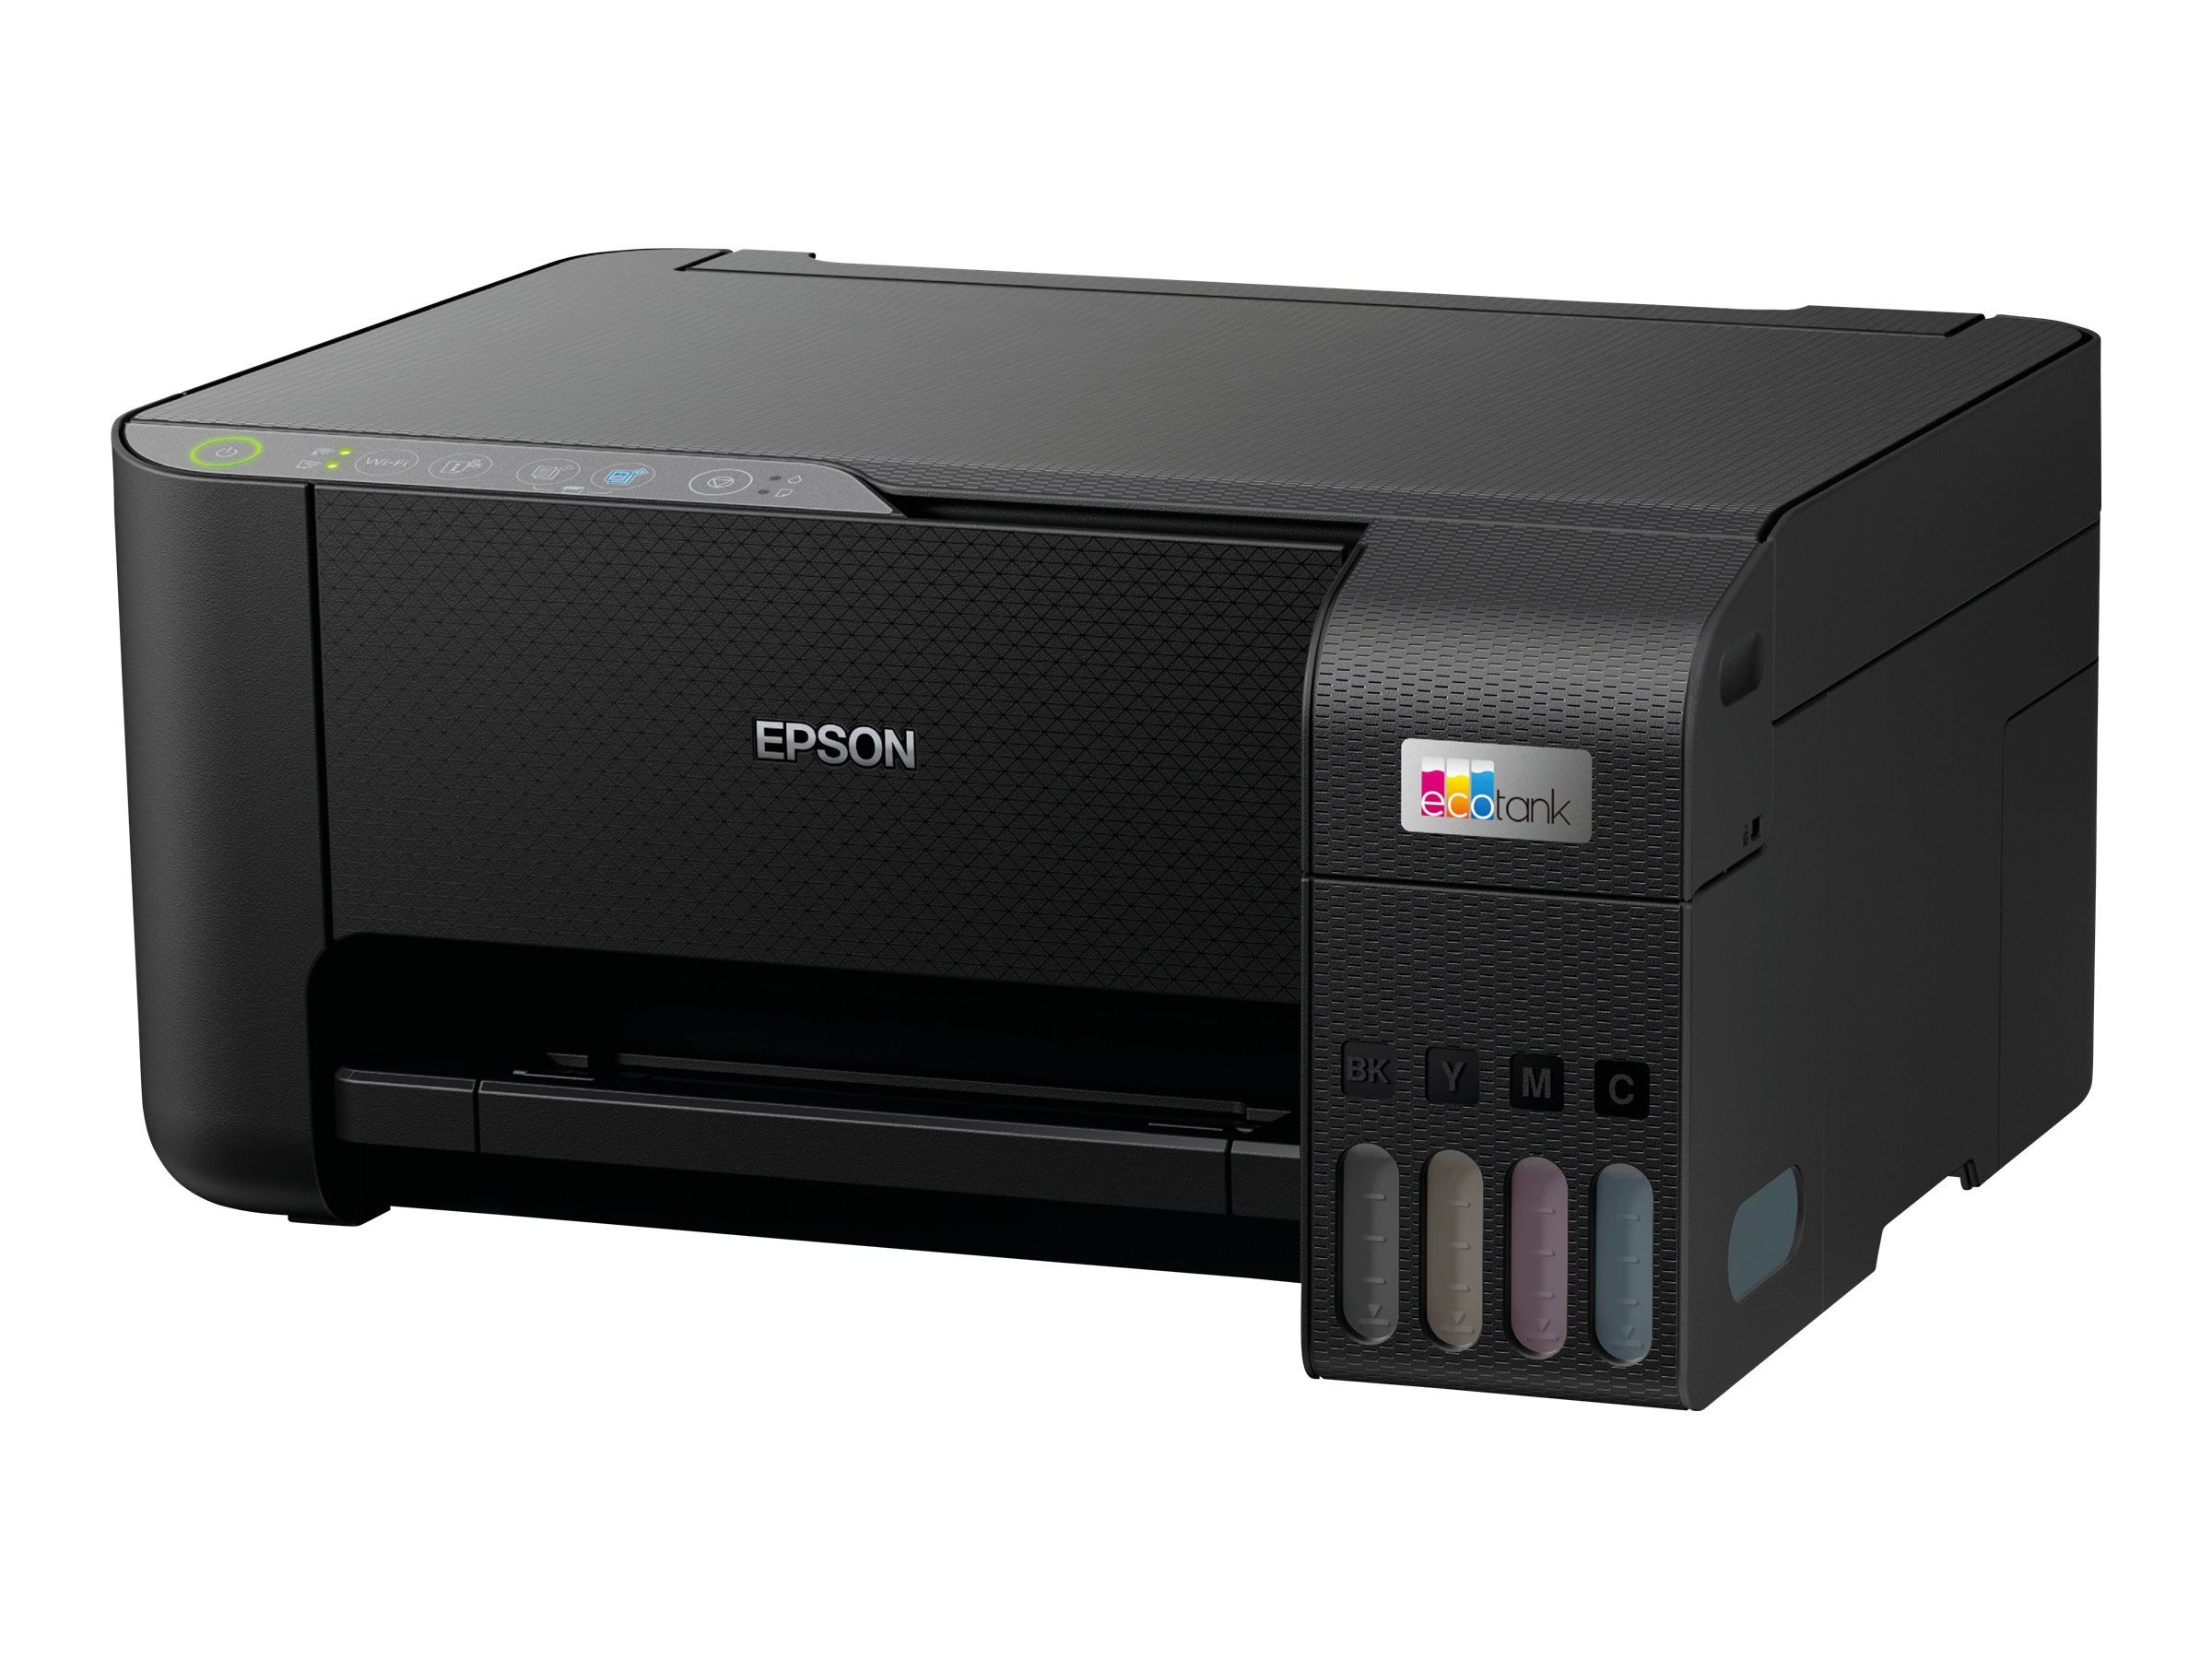 EPSON L3250 MFP ink Printer up to 10ppm_1